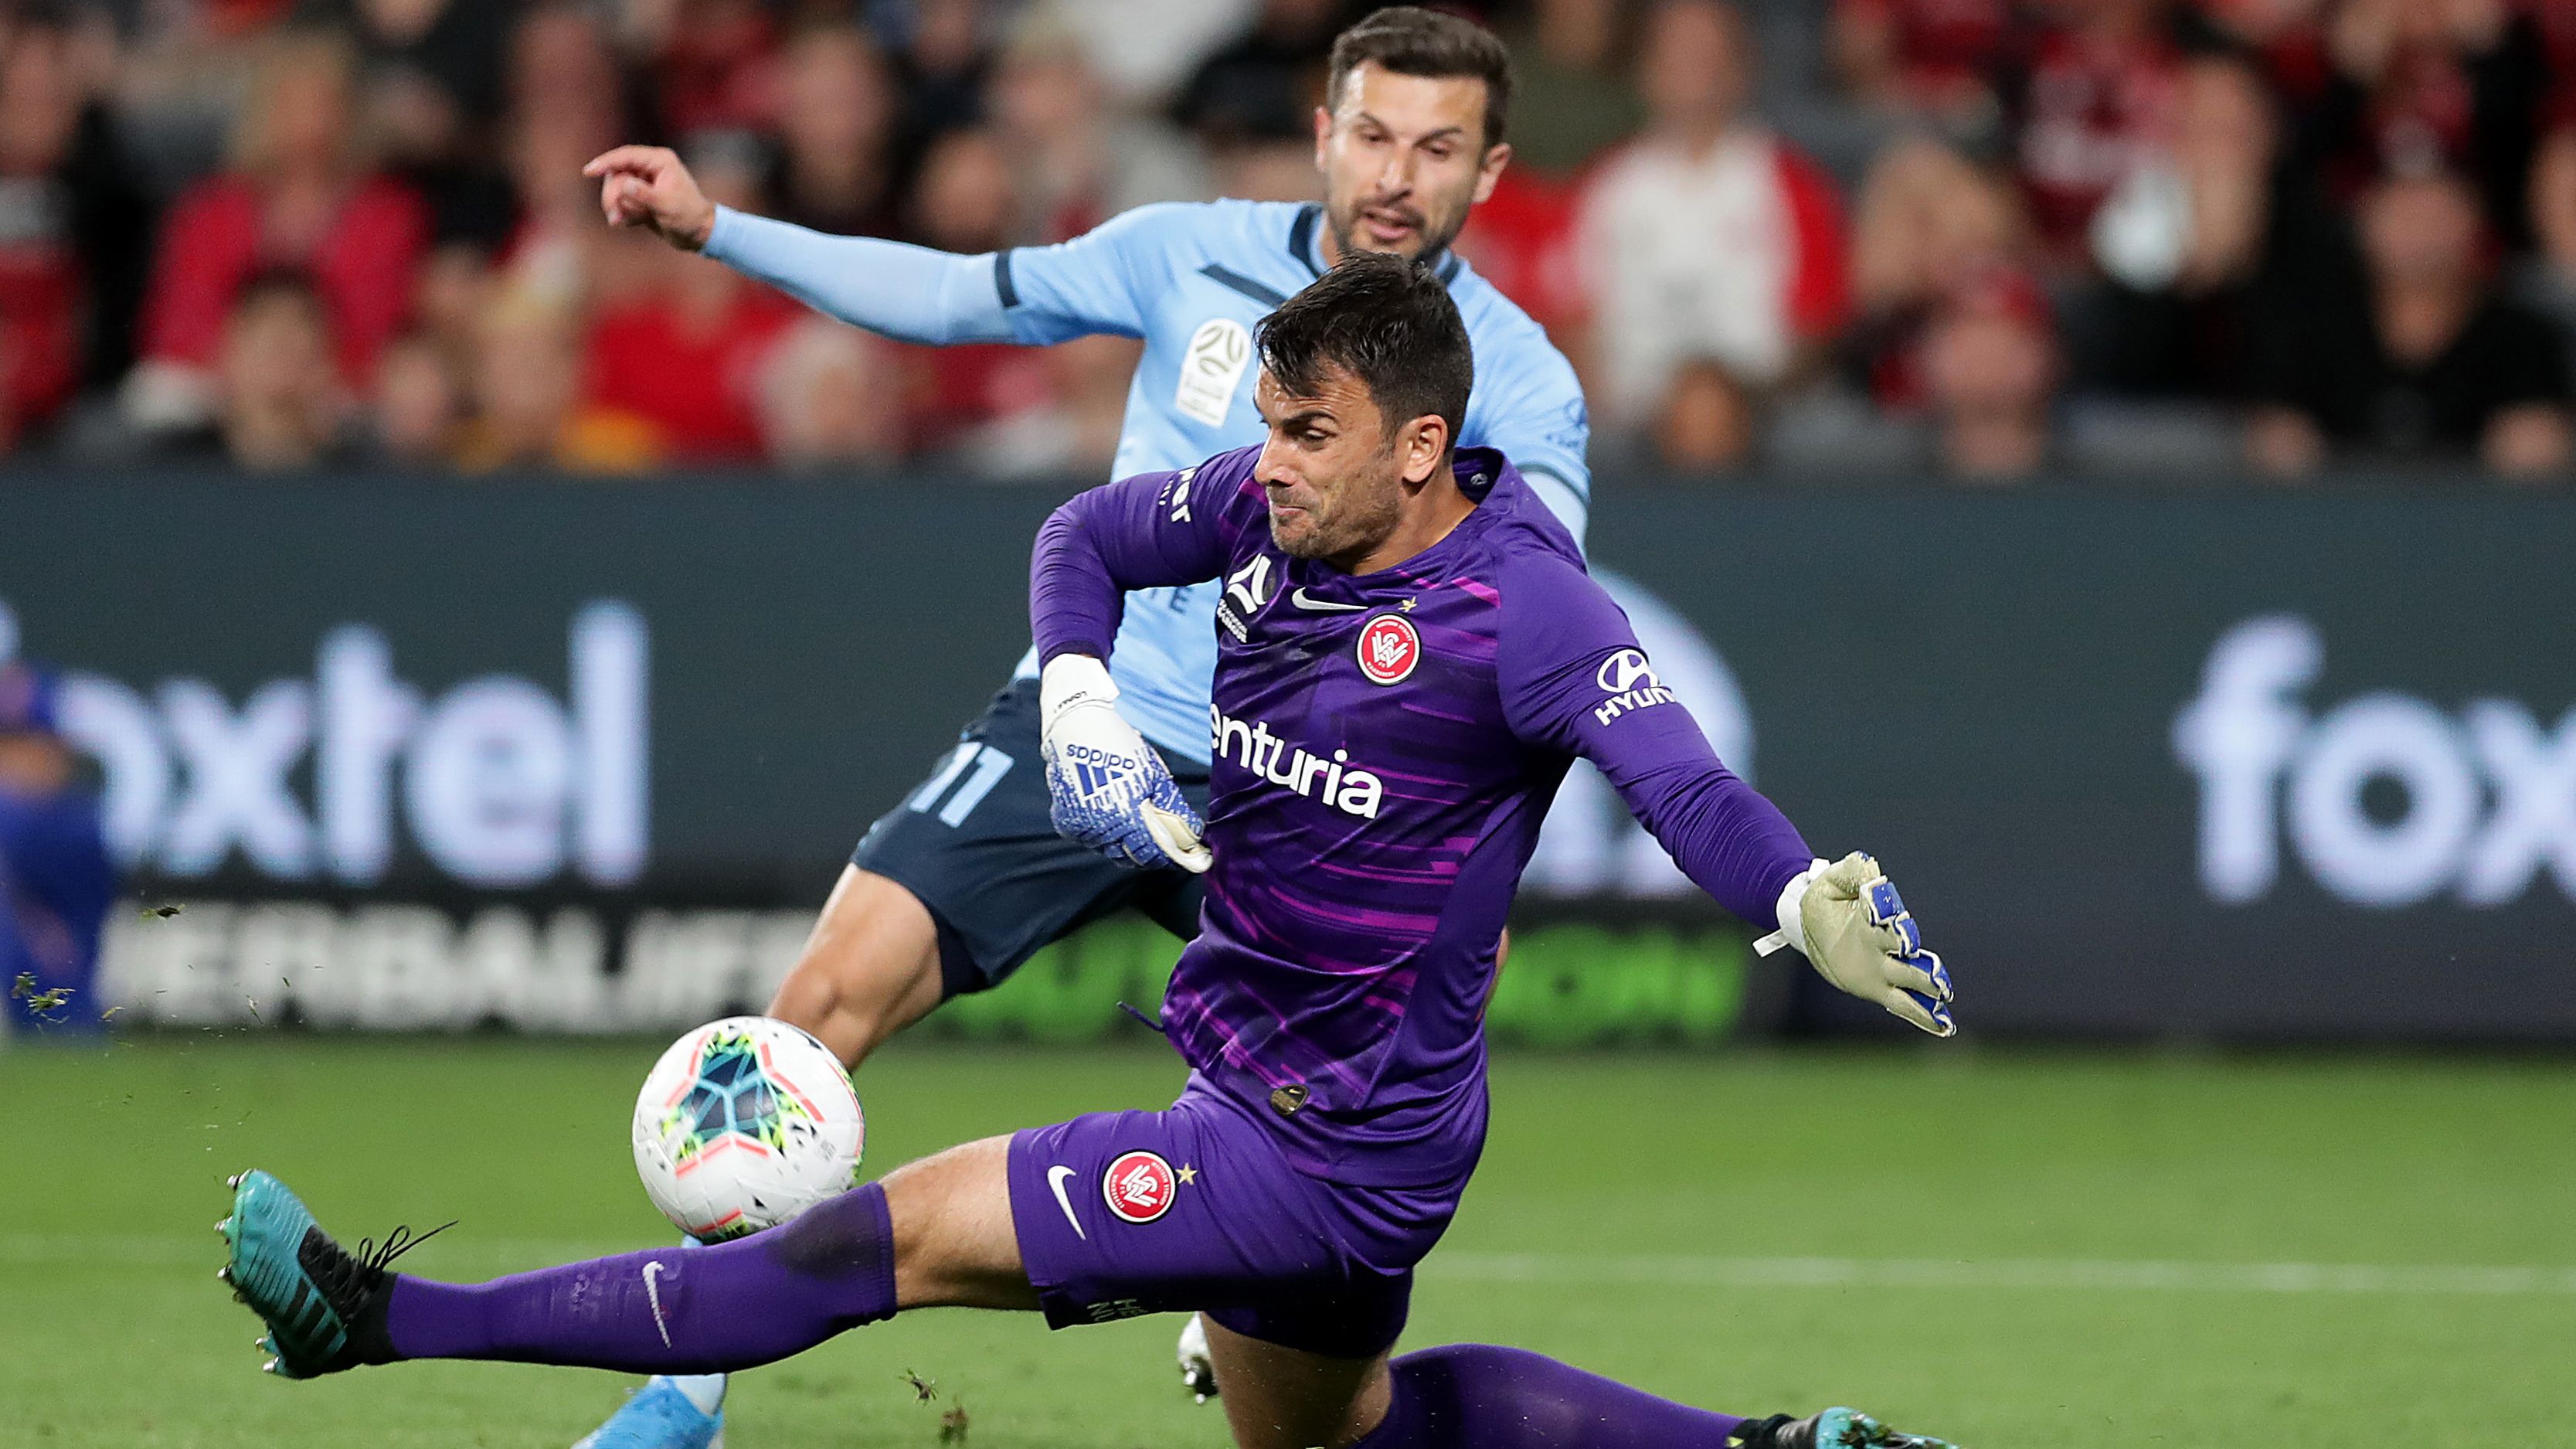 Daniel Lopar of the Wanderers saves from Kosta Barbarouses of Sydney FC at Bankwest Stadium.